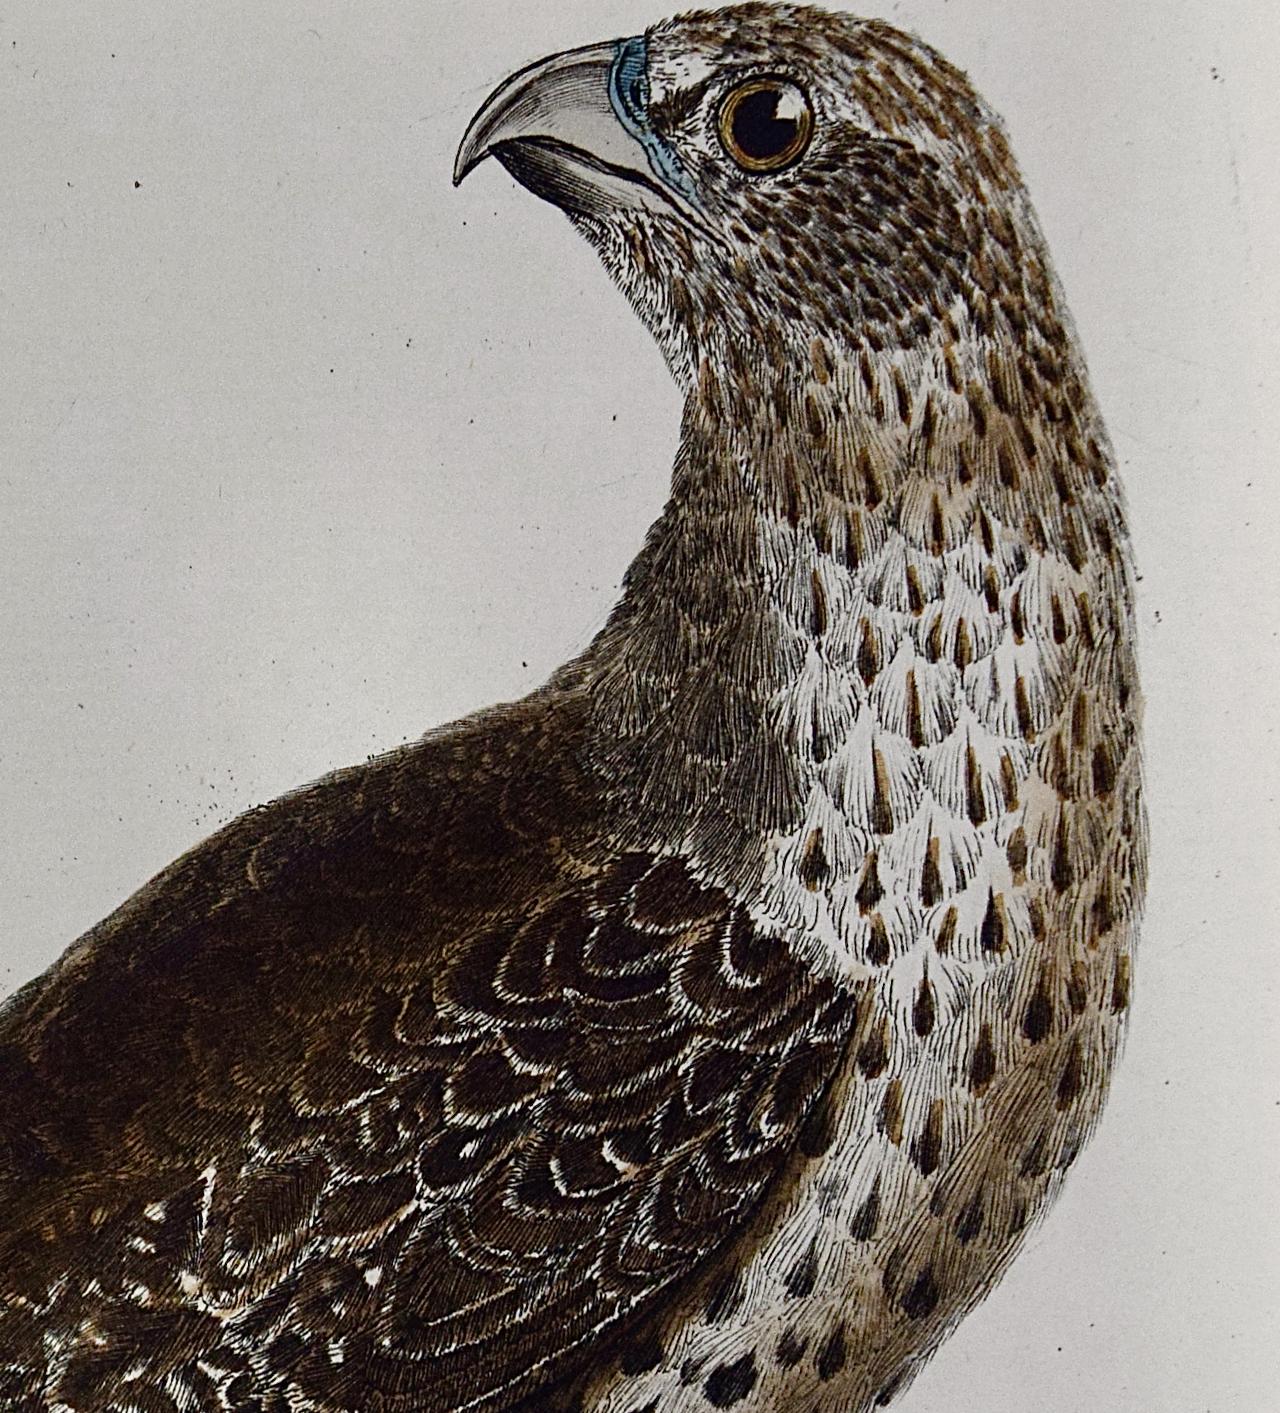 An Icelandic GyrFalcon: An 18th Century Hand-colored Engraving by Martinet - Gray Animal Print by Francois Nicolas Martinet